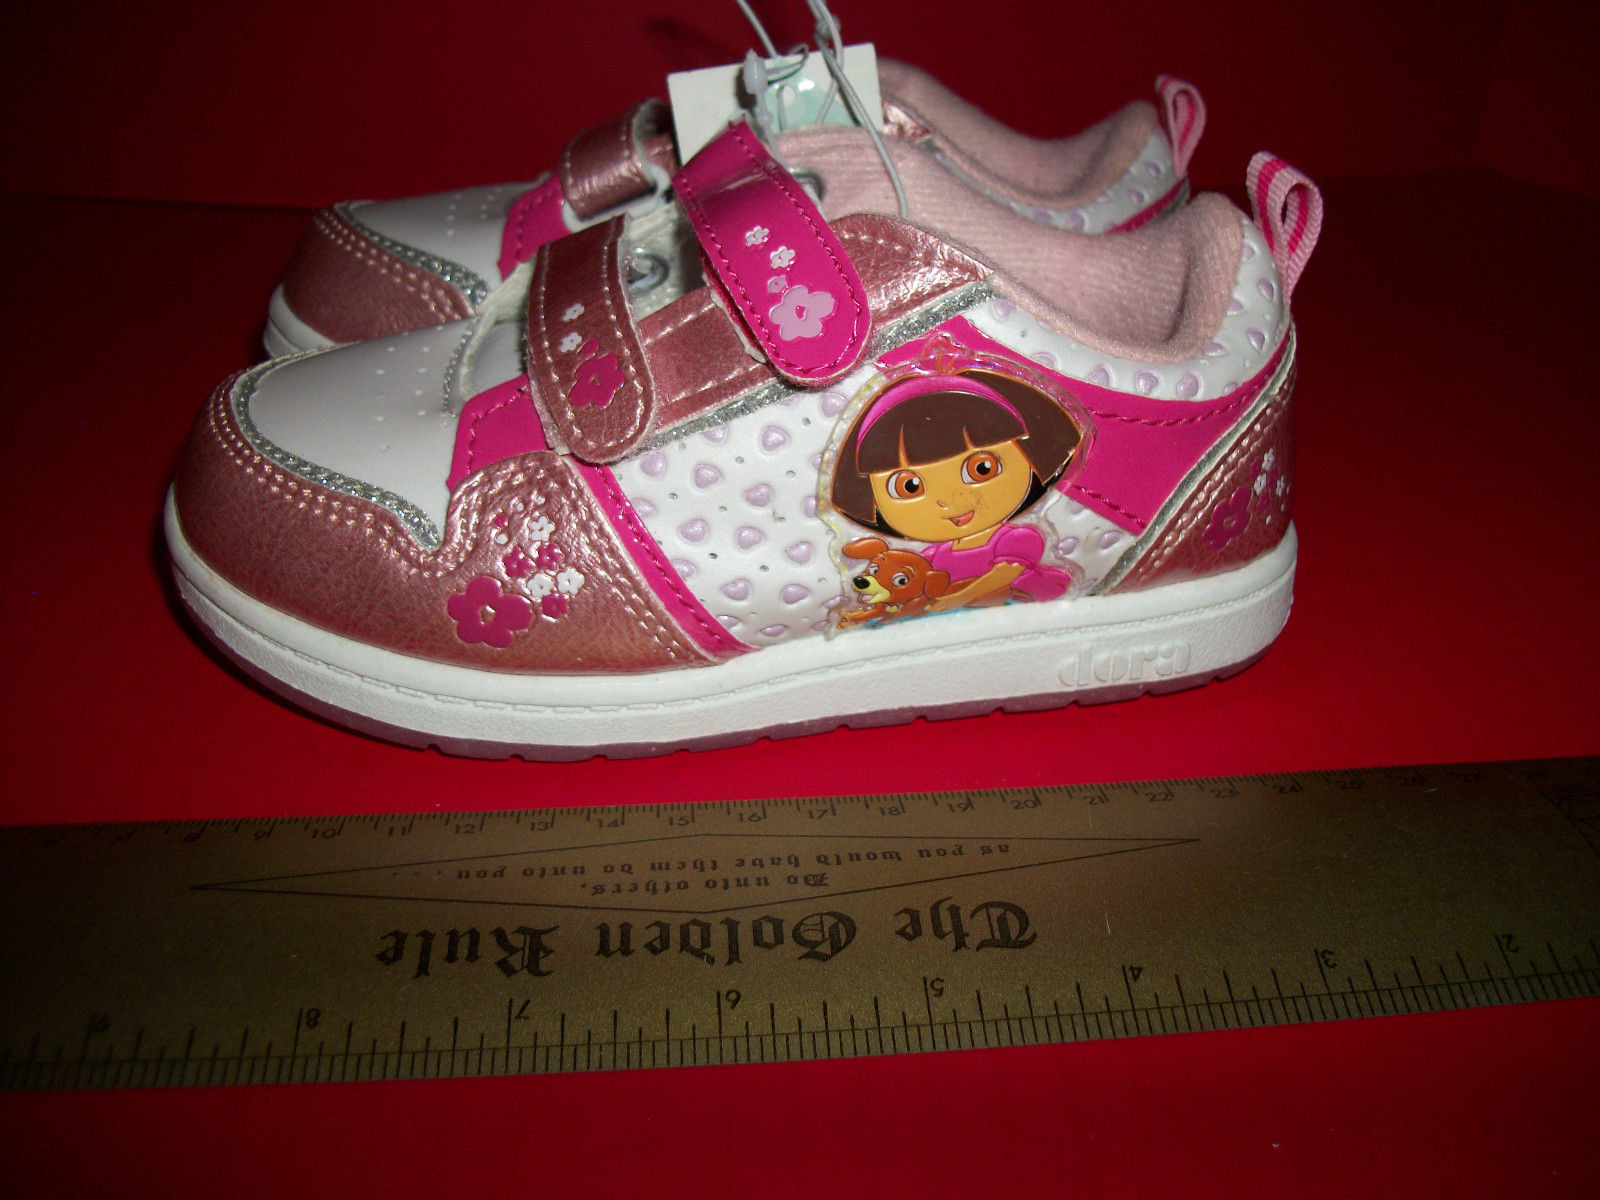 Dora The Explorer Baby Shoes Size 9.5 and 50 similar items